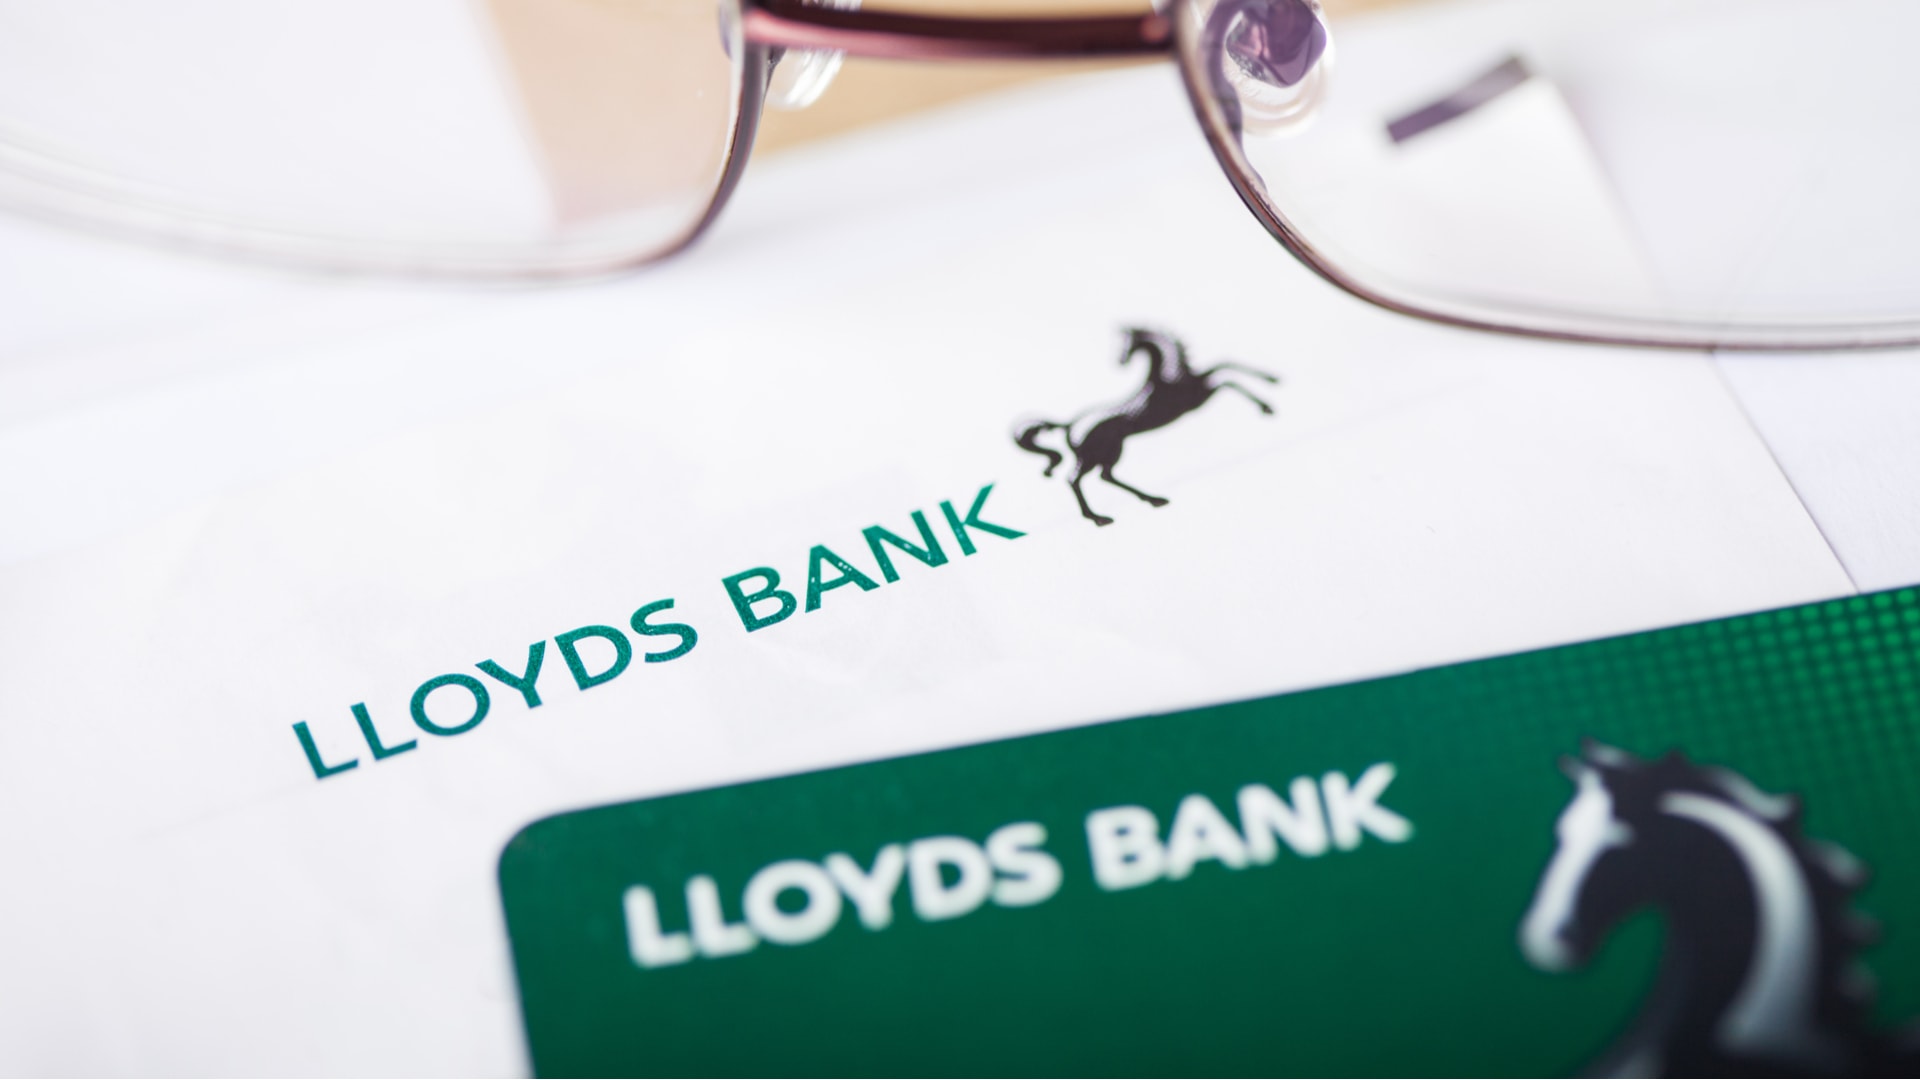 Lloyds Share Price Prediction After The Mixed Earnings